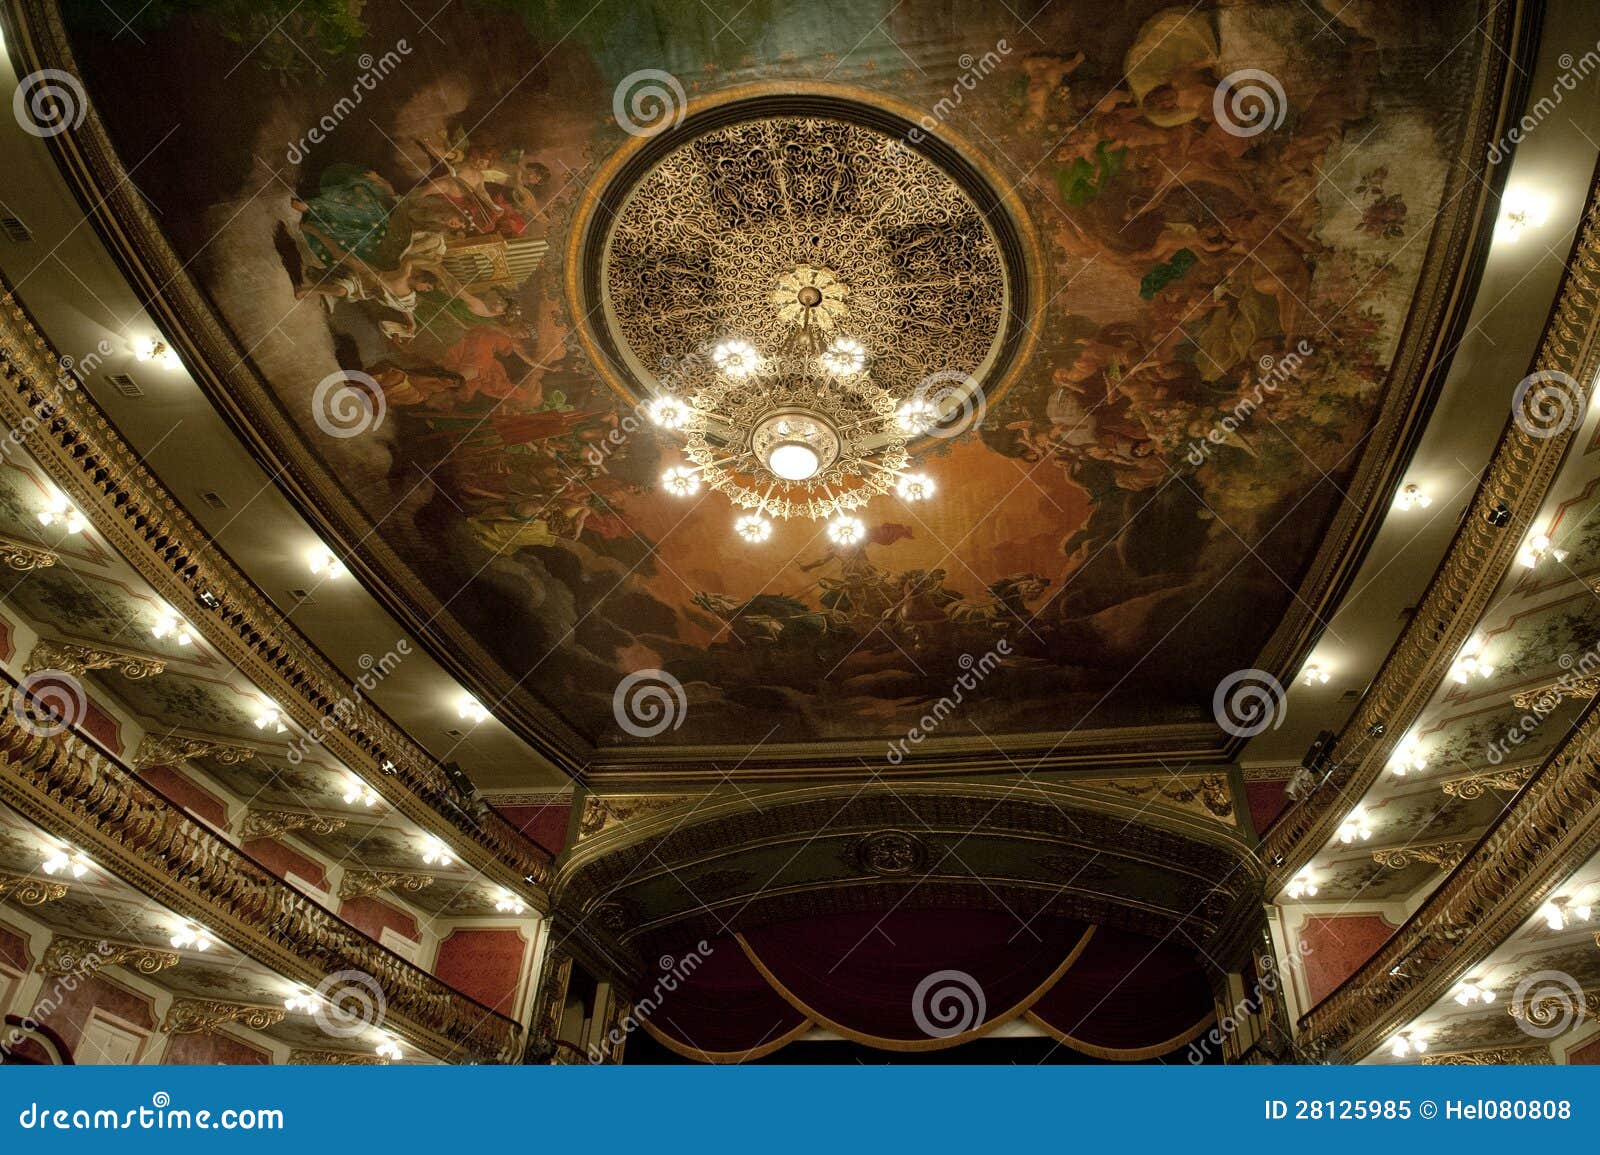 manaus opera house inside, painted ceiling and luster